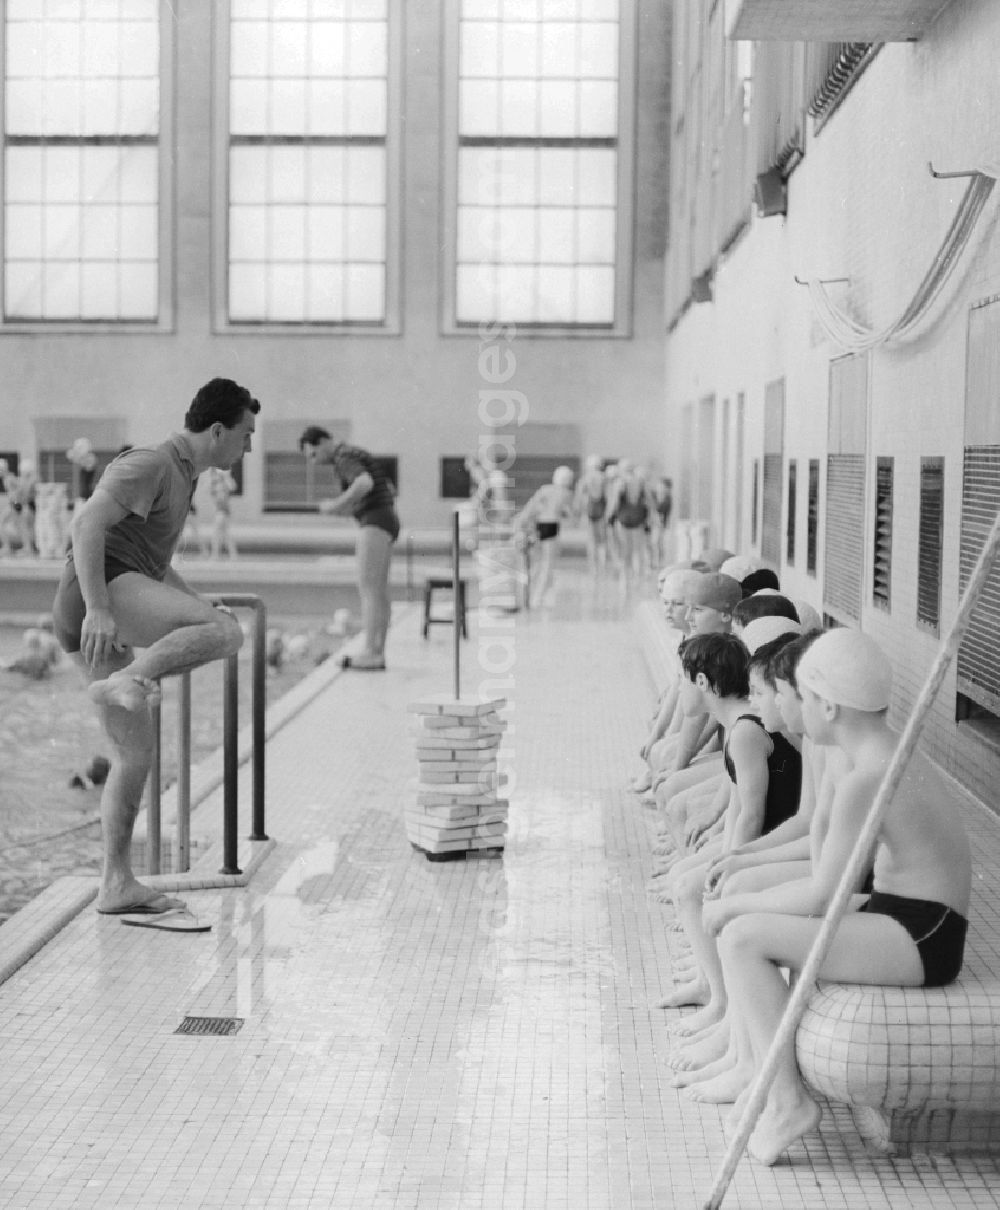 GDR photo archive: Berlin - Swimming lessons at municipal baths James Simon in Berlin, the former capital of the GDR, the German Democratic Republic. A swimming instructor explains the containment